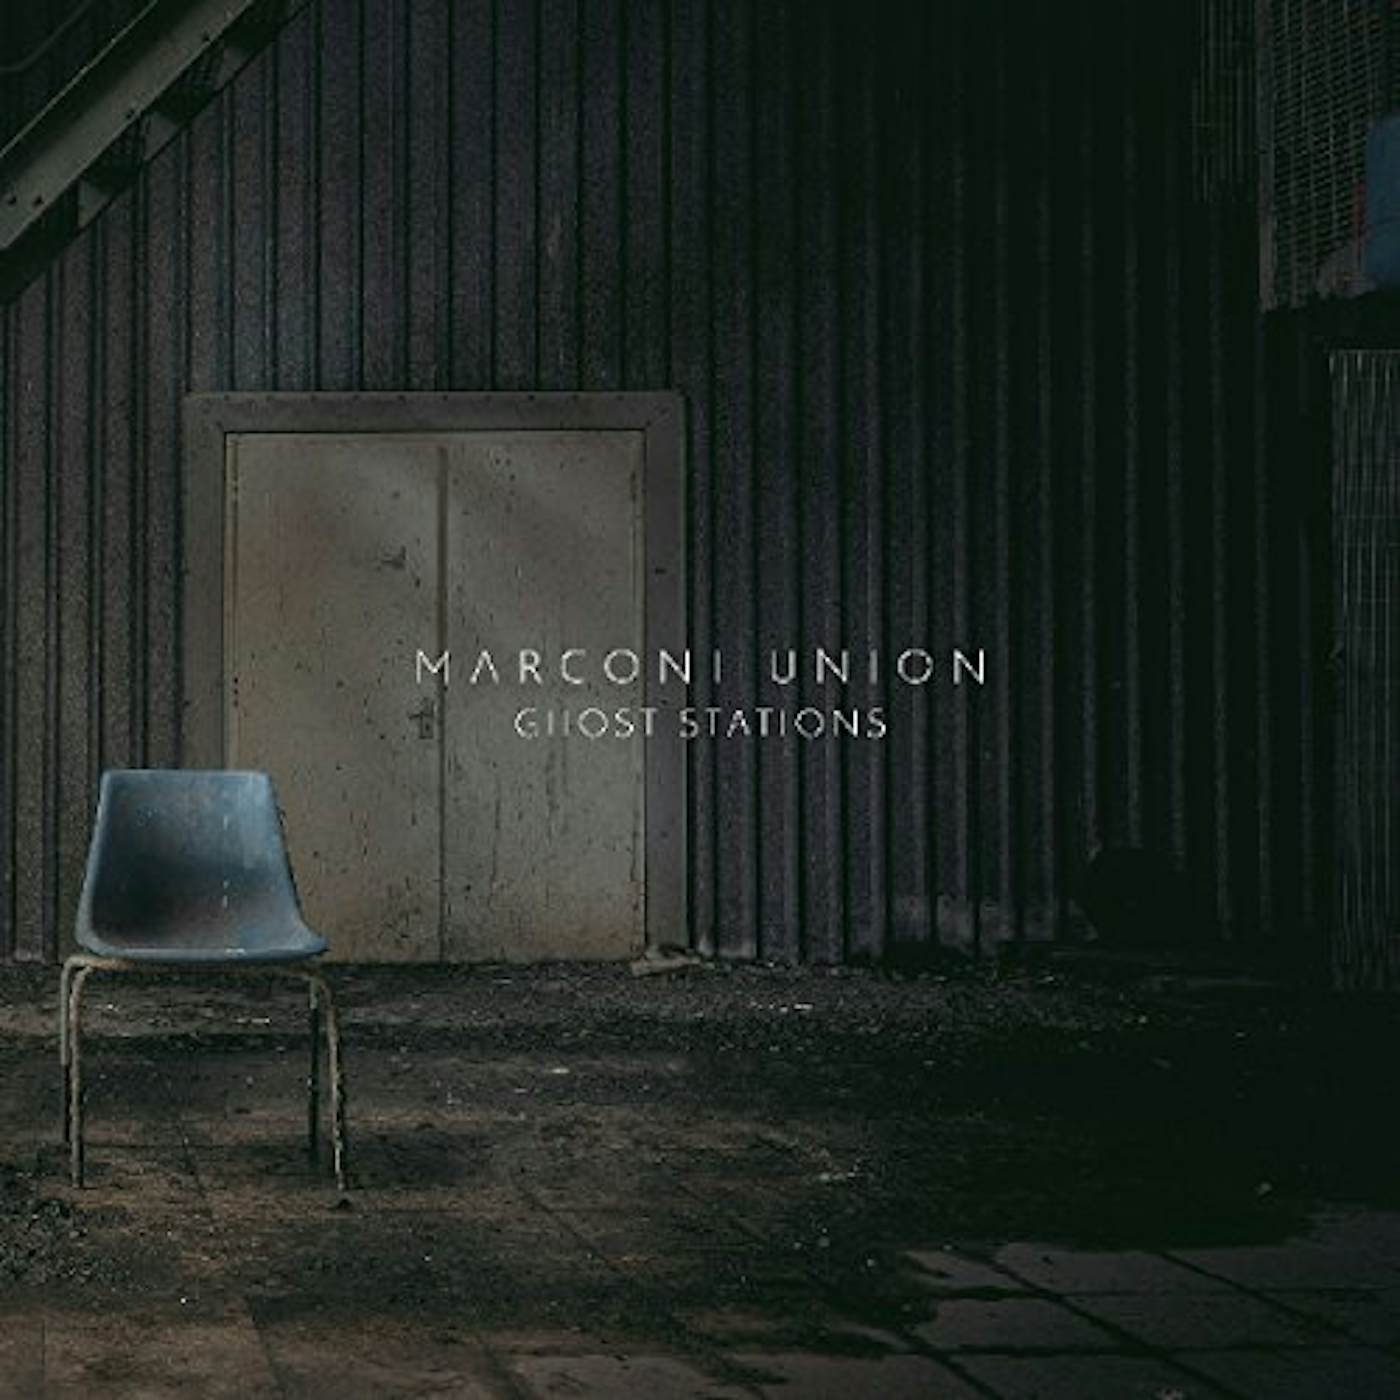 Marconi Union Ghost Stations Vinyl Record